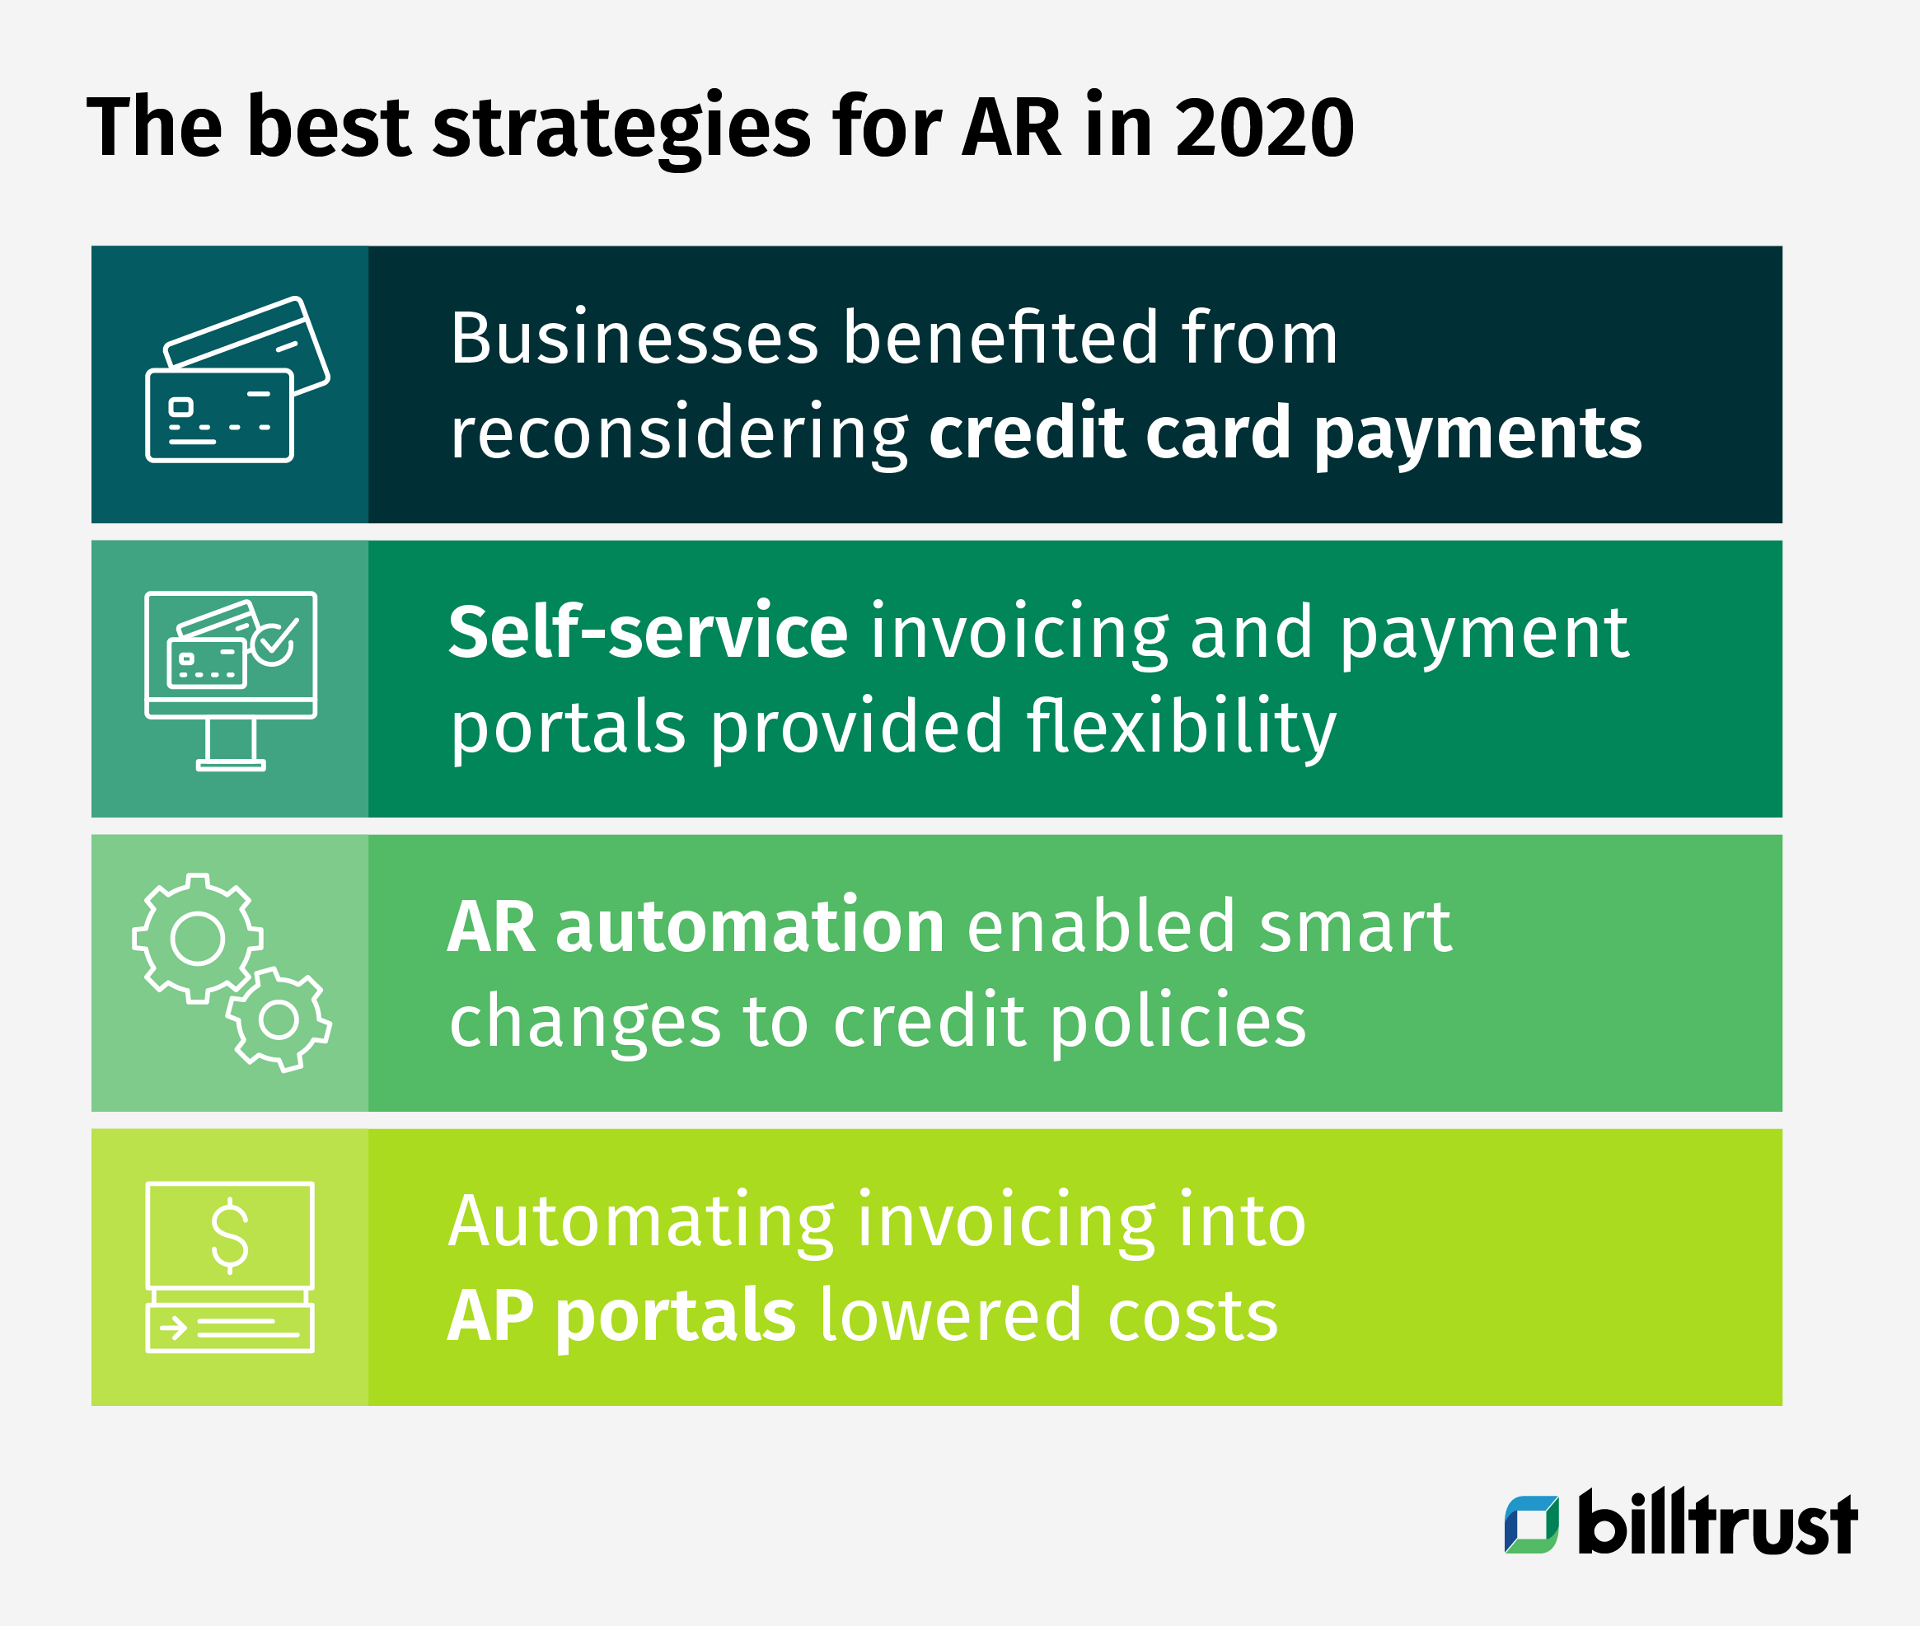 the four best strategies for AR in 2020